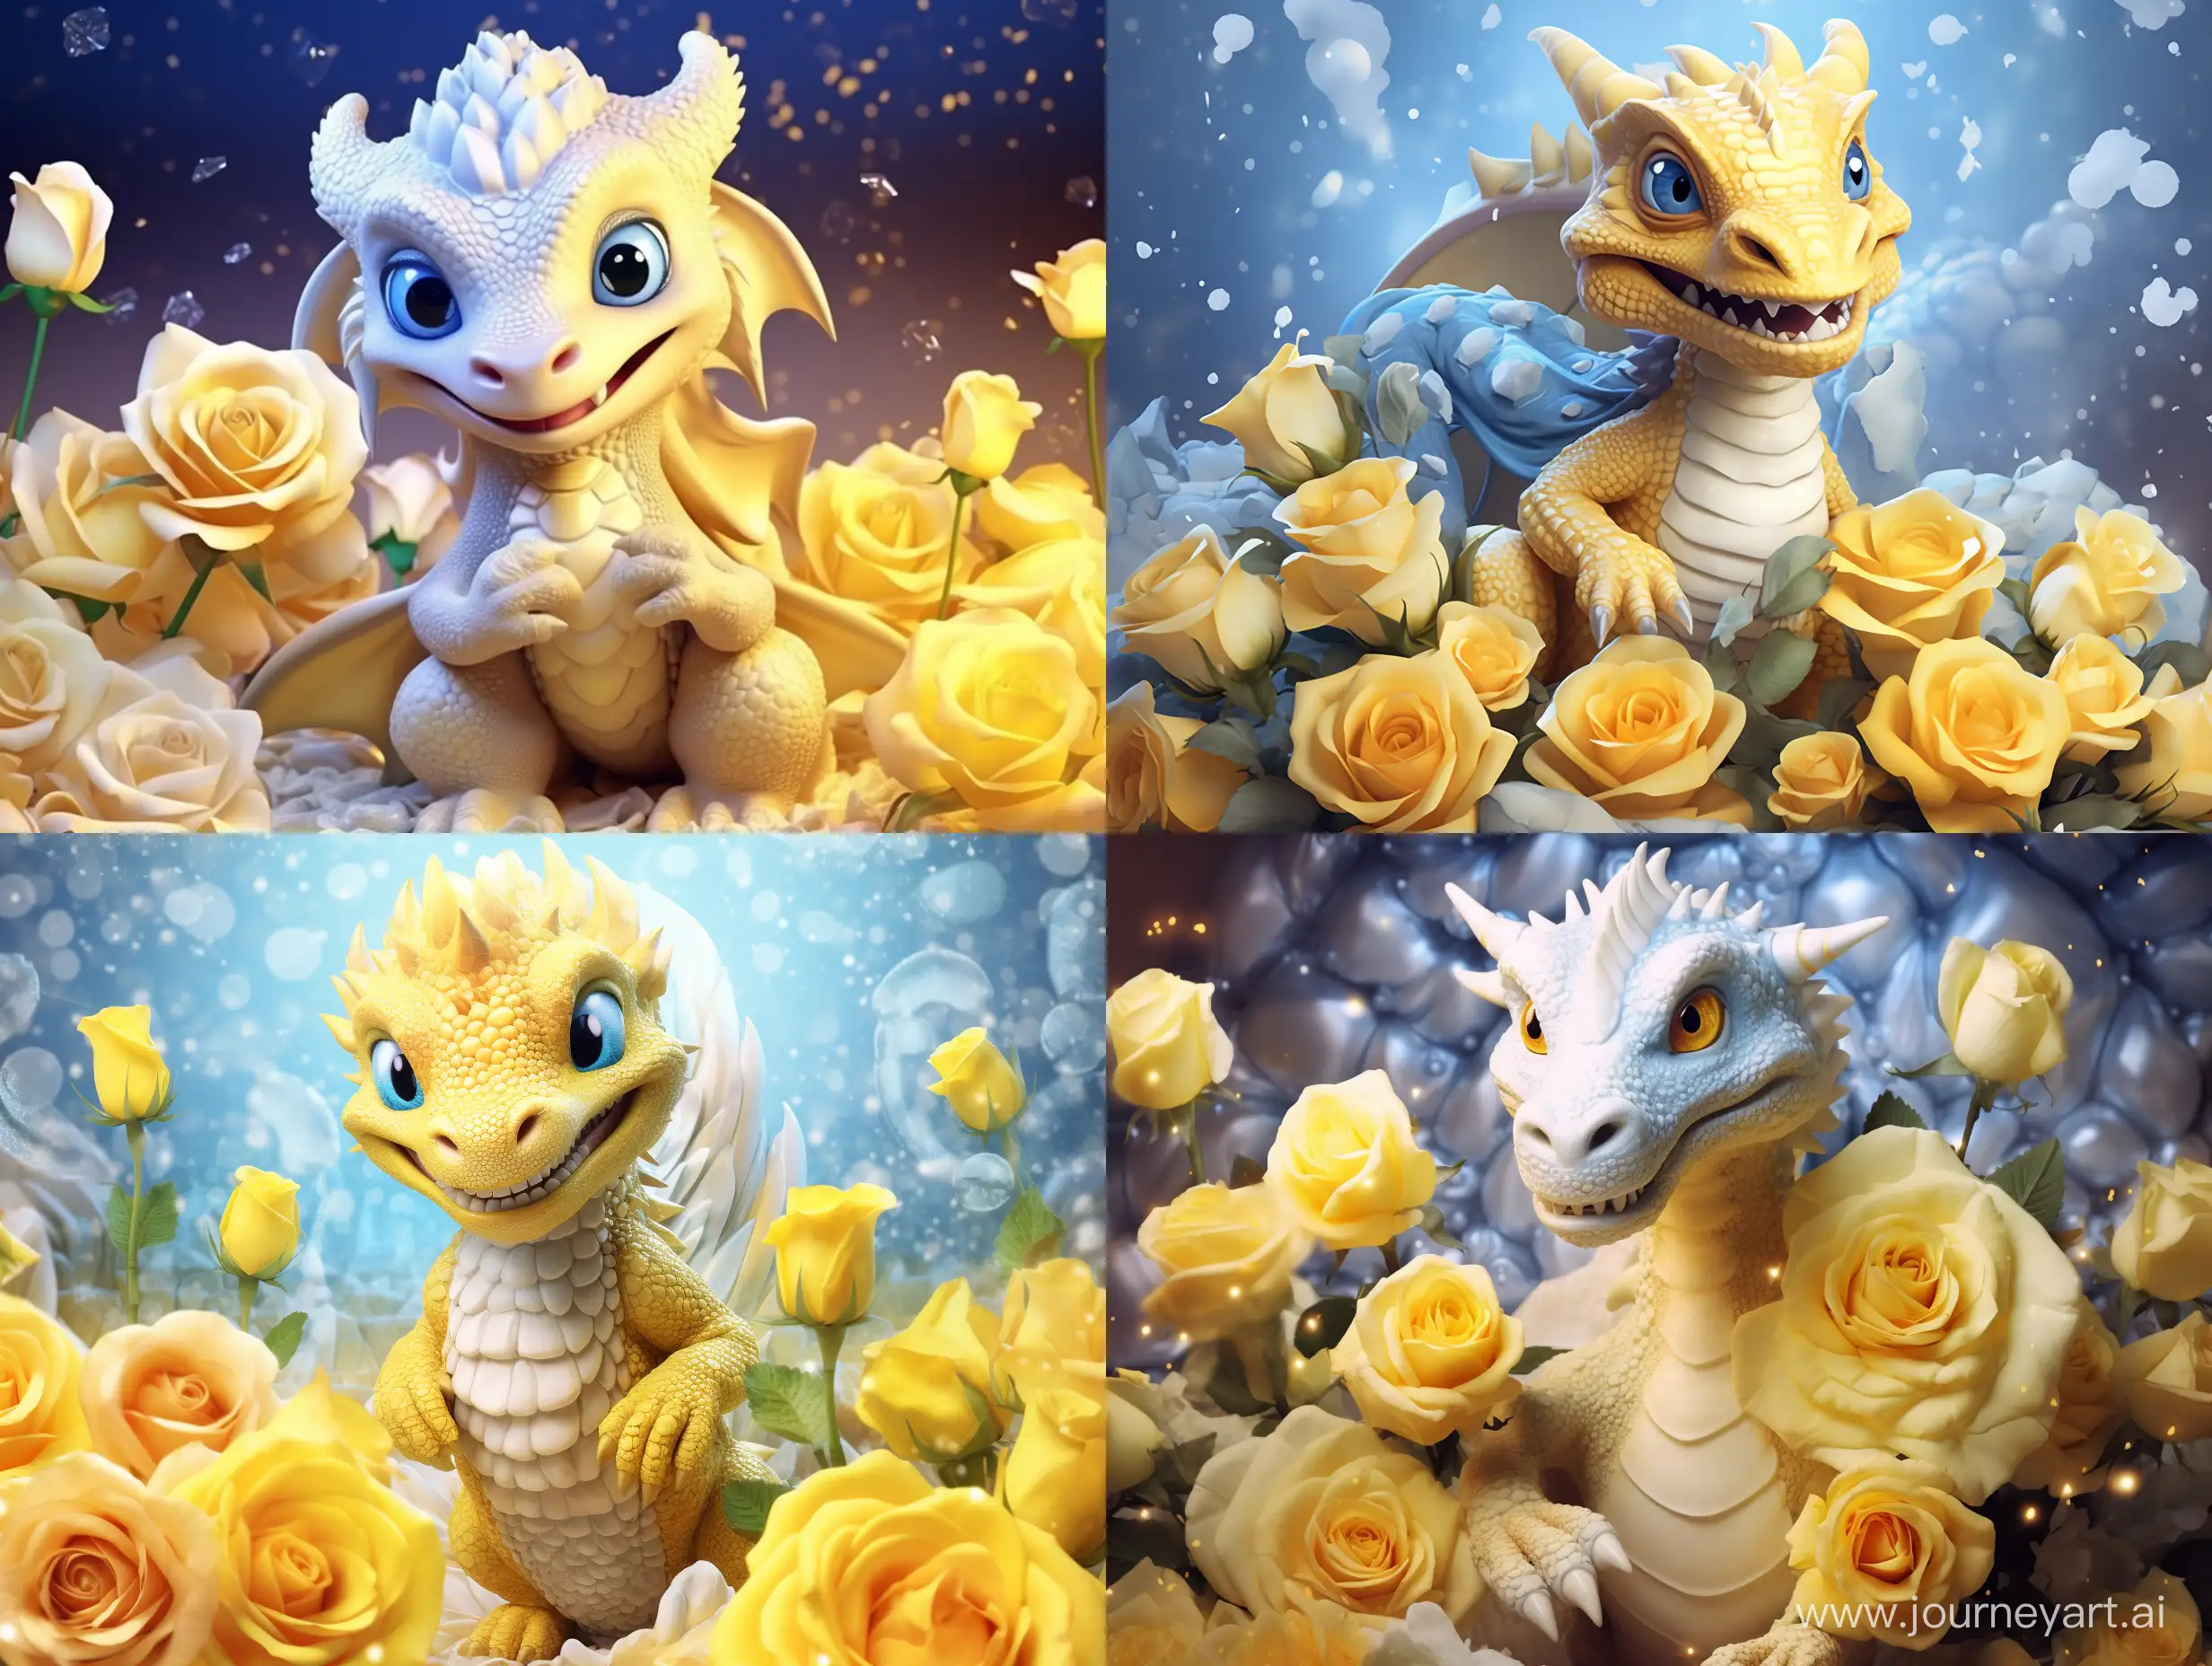 Adorable-Smiling-Dragon-Baby-with-Crystal-Rose-in-a-Festive-Christmas-Setting